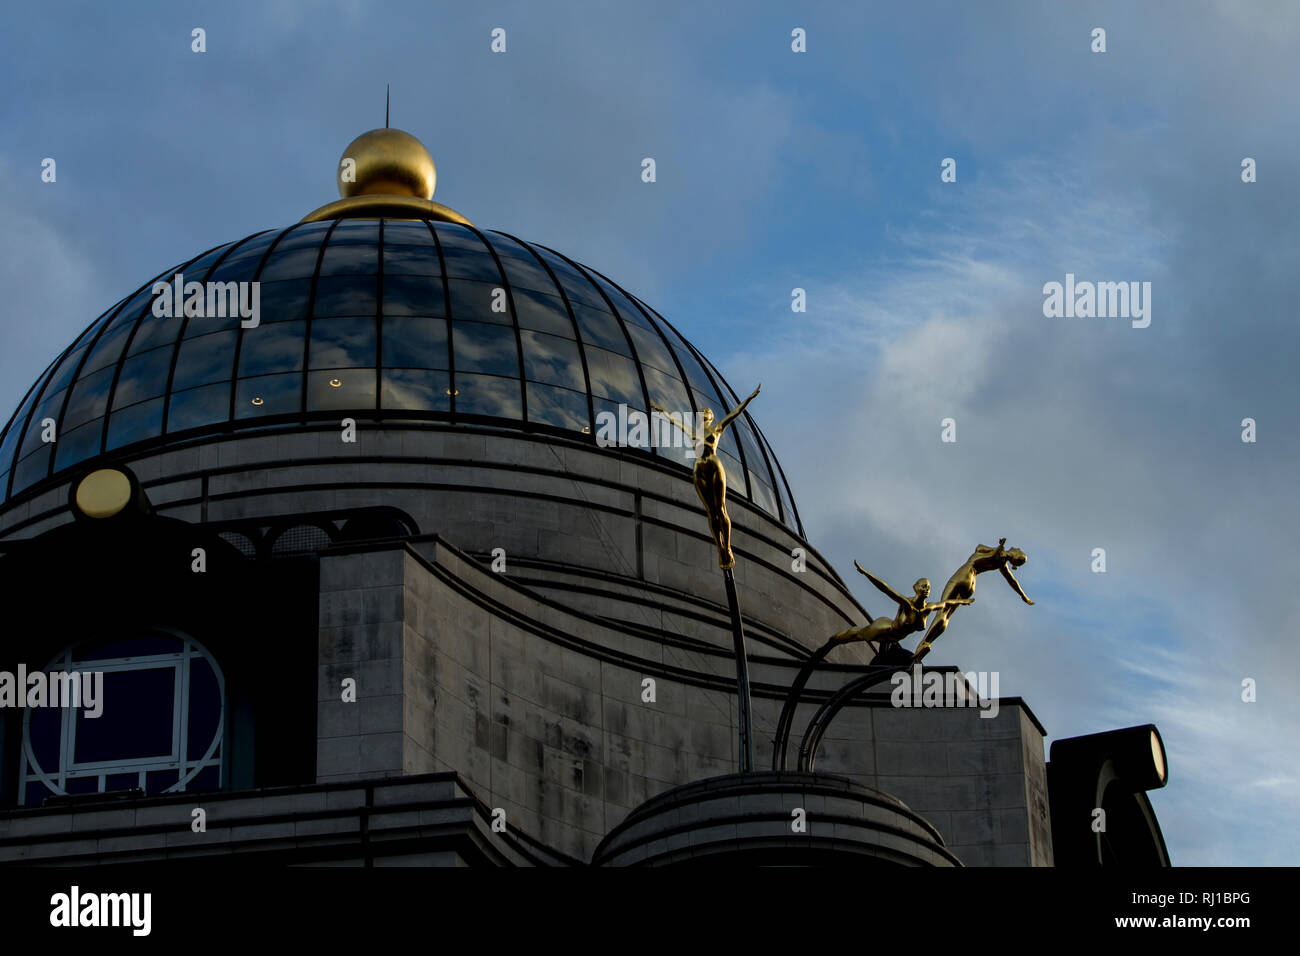 Haymarket, London/UK - May 4 2018: Three Synchronised Divers of Rudy Weller at the Criterion Building & Its Dome. Stock Photo